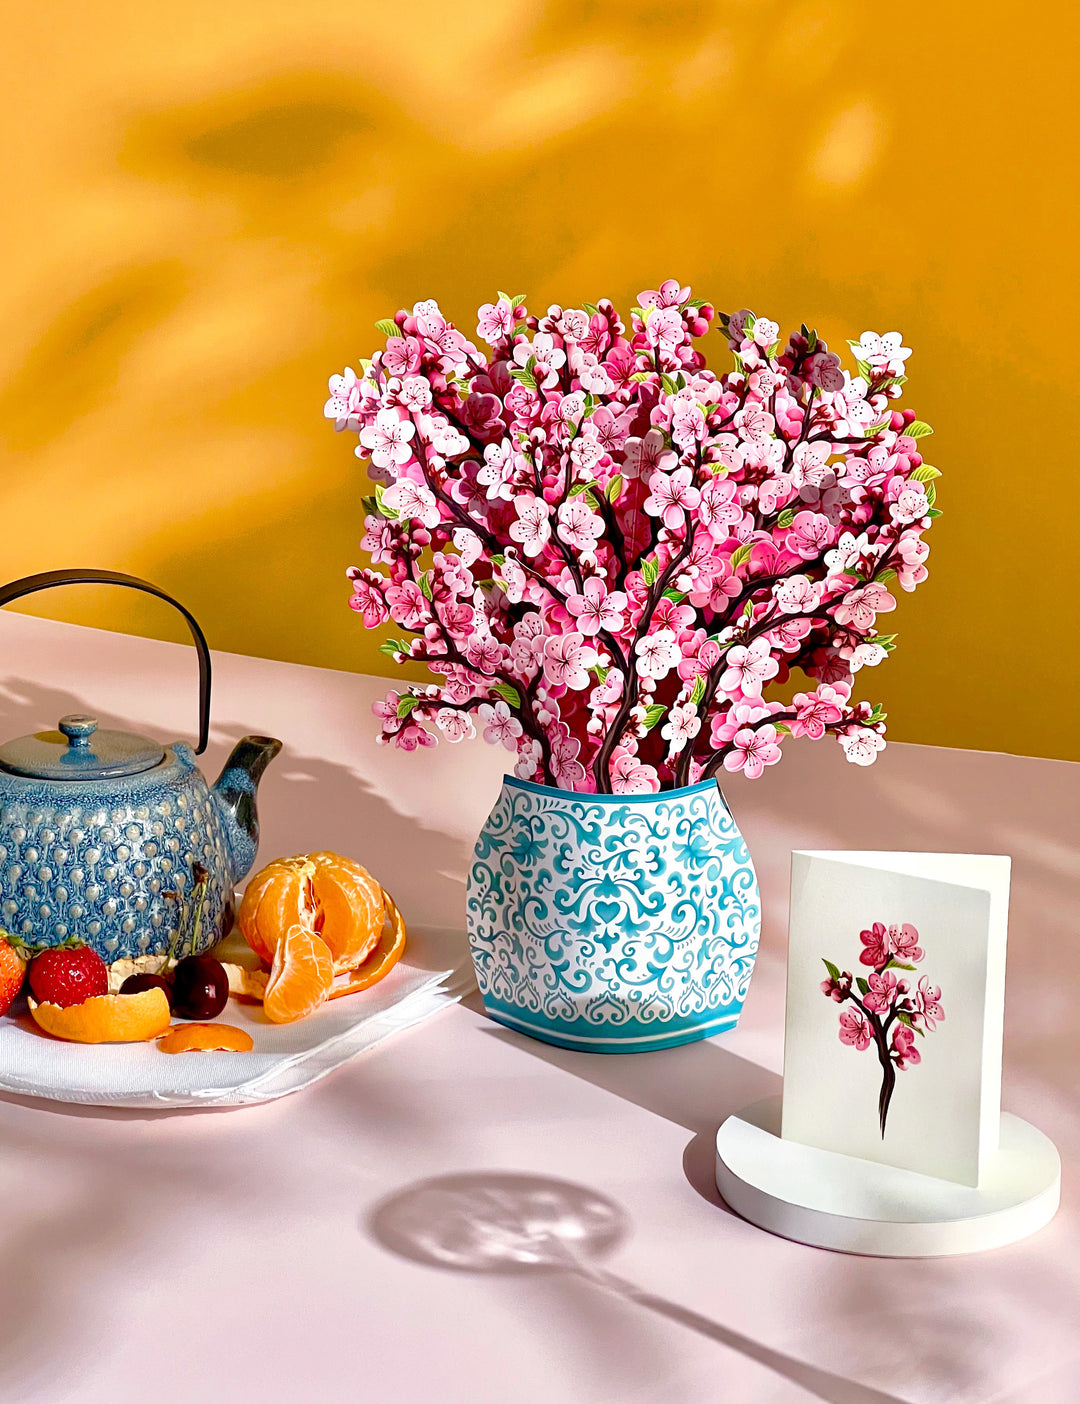 Our FreshCut Paper Cherry Blossom come ready to present in their own festive blue and white patterned vase. More than a greeting card, our flowers are always FreshCut Paper that never wilt, fade or require water.